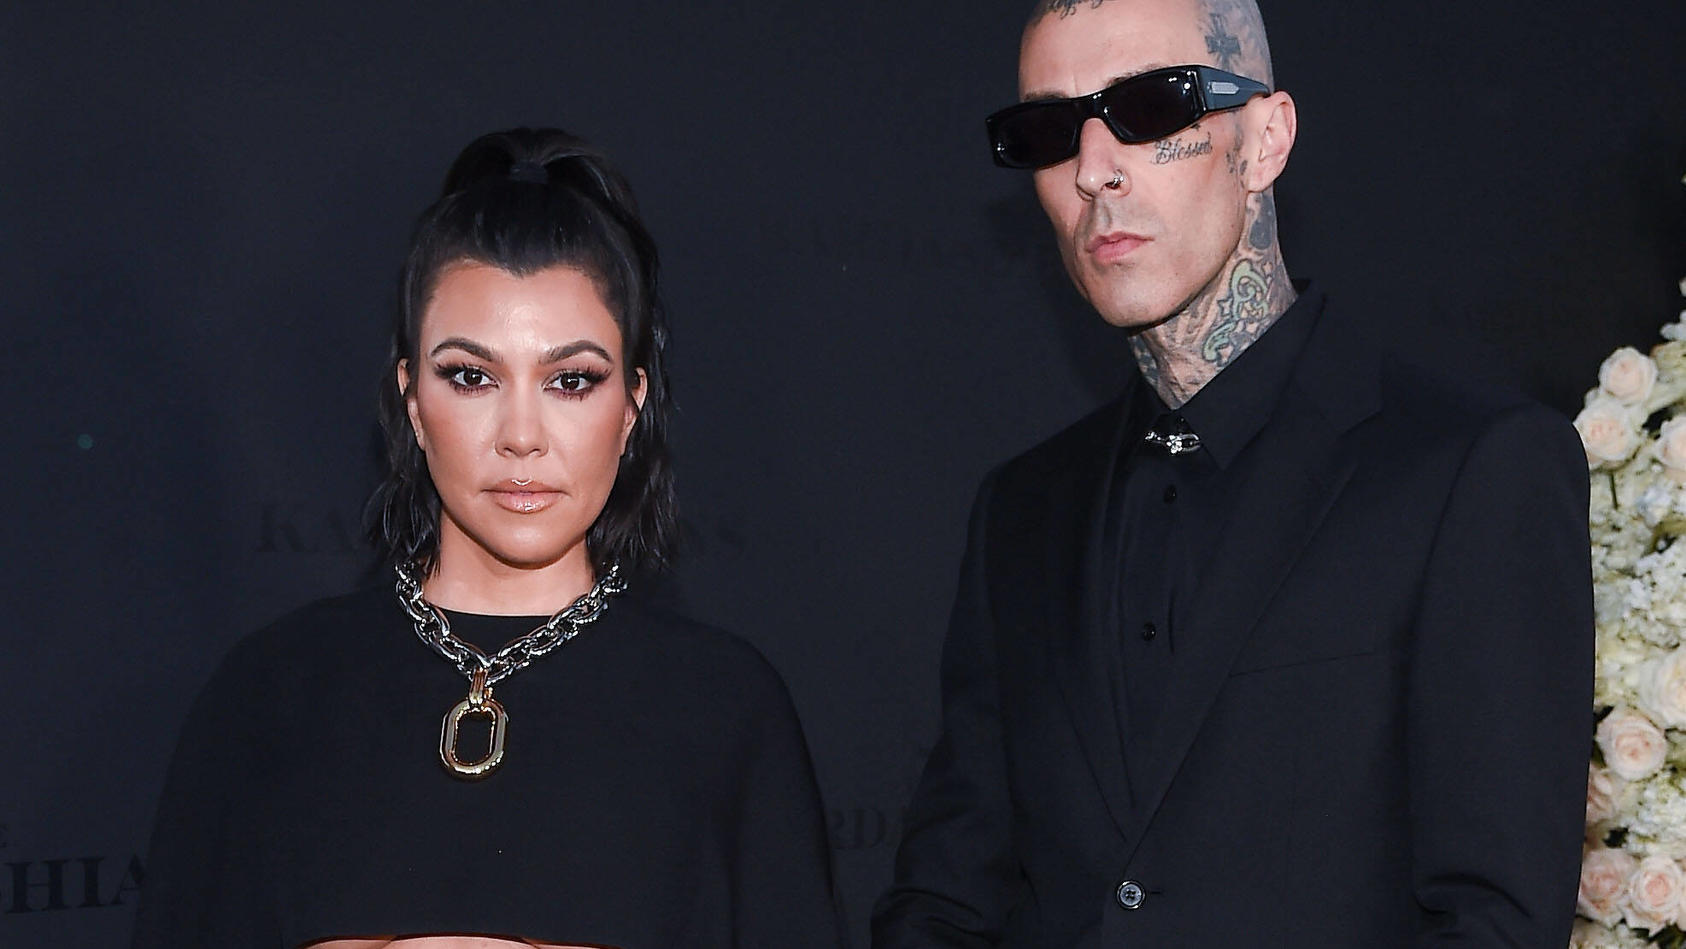  Entertainment Themen der Woche KW14 Entertainment Bilder des Tages Los Angeles Premiere Of Hulu s The Kardashians FOR EDITORIAL USE ONLY In this handout photo provided by Hulu/The Walt Disney Company, Kourtney Kardashian and Travis Barker arrive at 